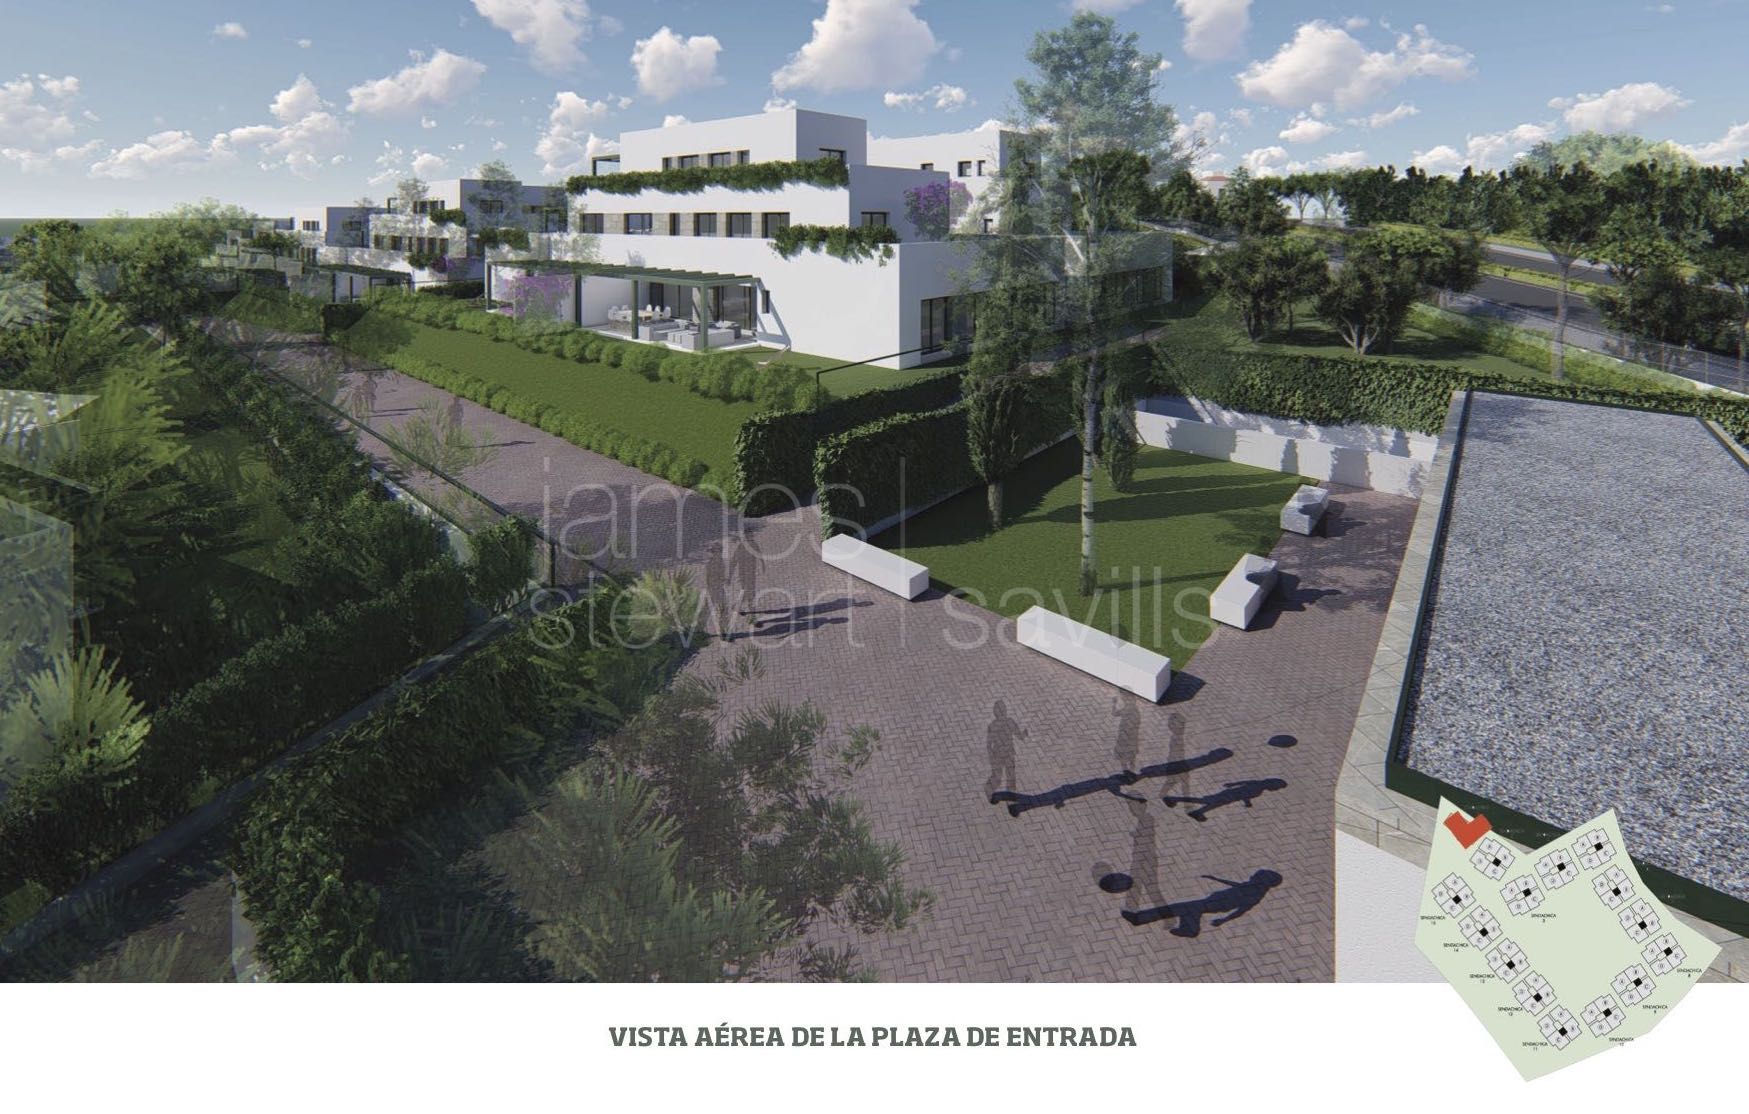 SENDA CHICA - a new contemporary gated community under construction within Sotogrande € 404,000 plus VAT